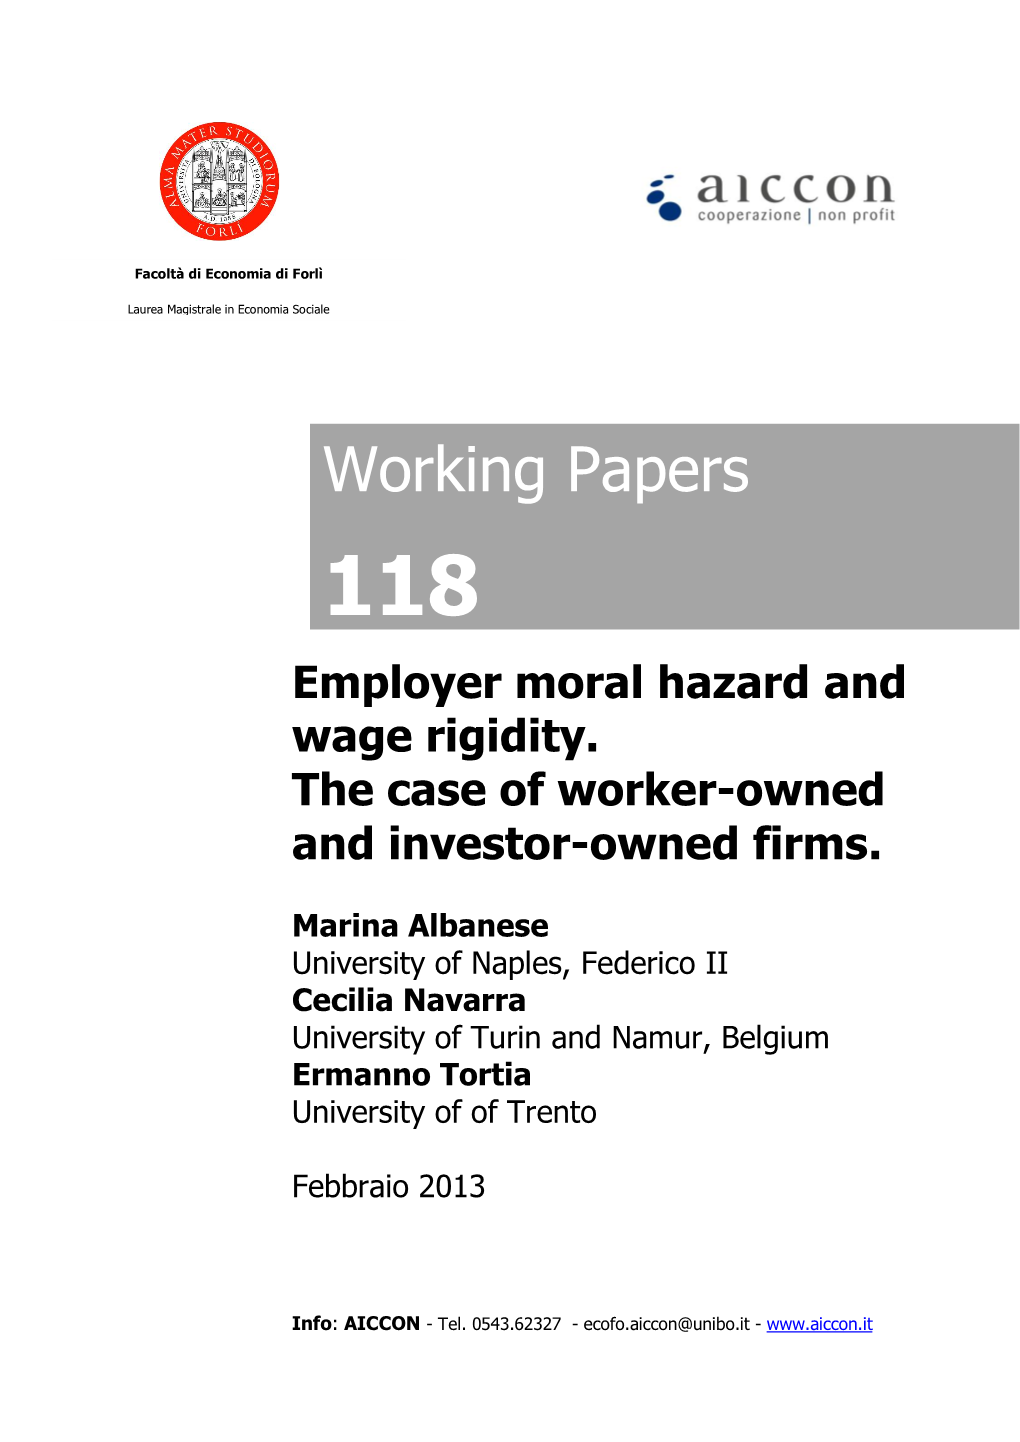 Employer's Moral Hazard and Wage Rigidity